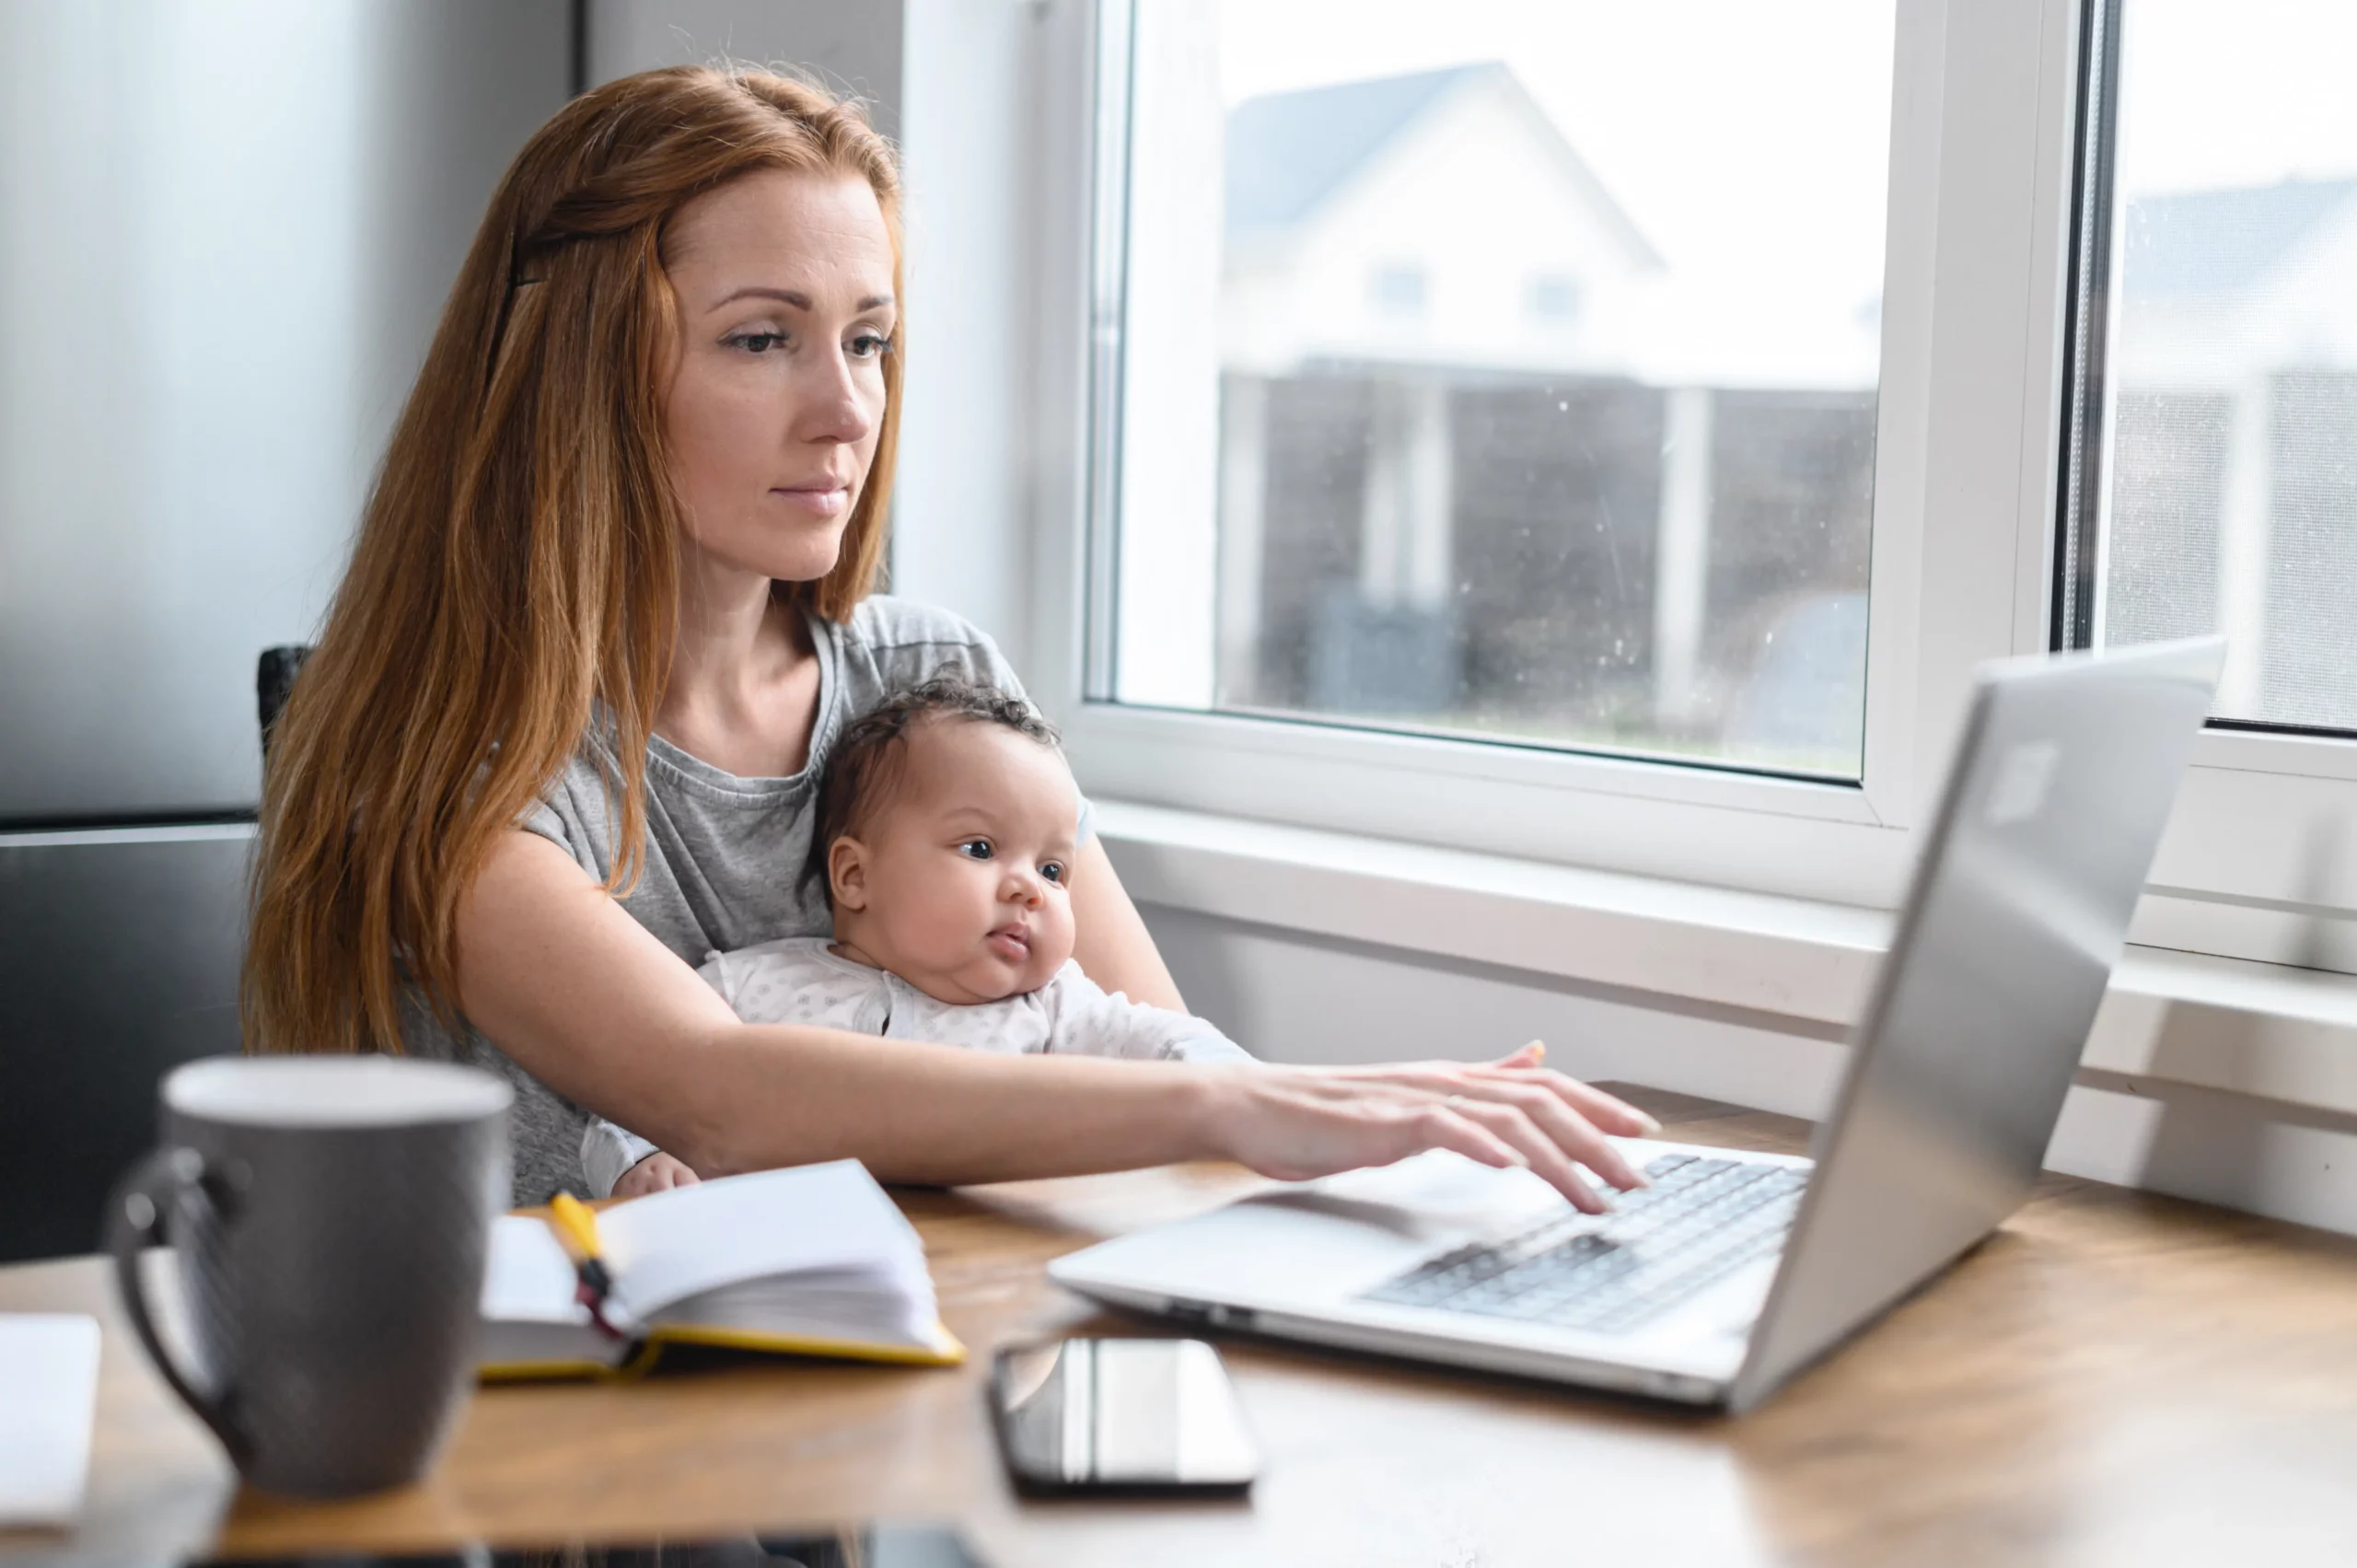 Woman working on laptop while holding baby on her lap looking miserable